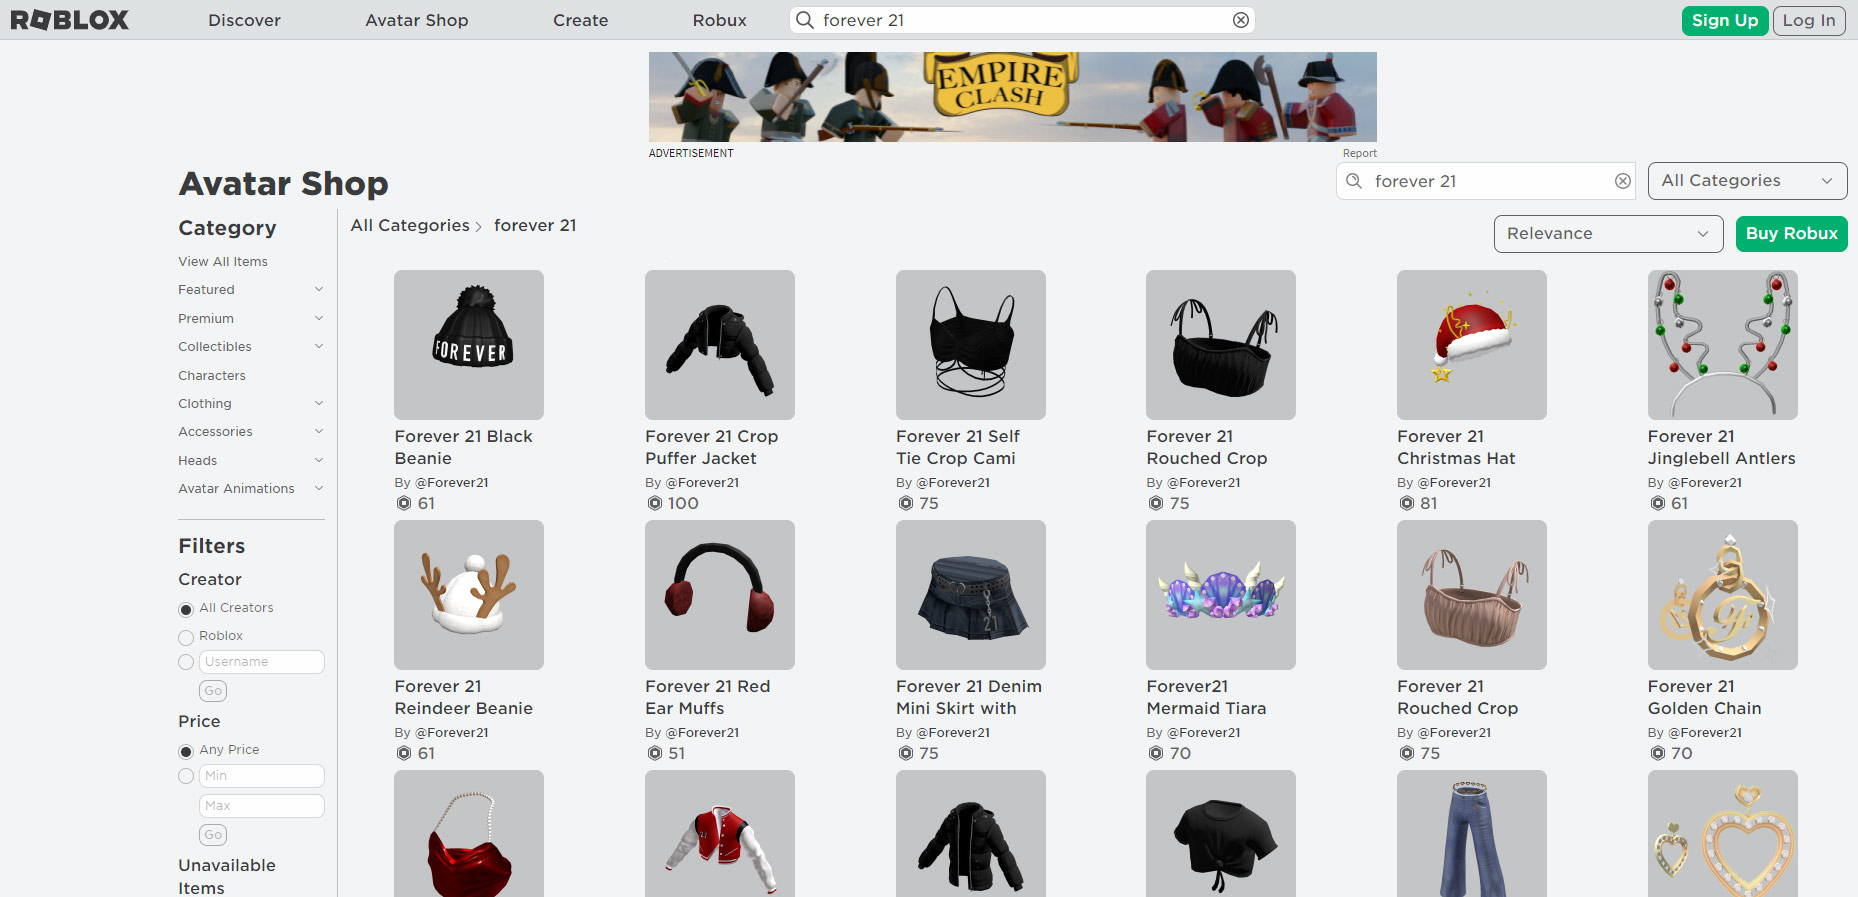 No more freebies on Roblox! New avatar customisation pricing model  announced